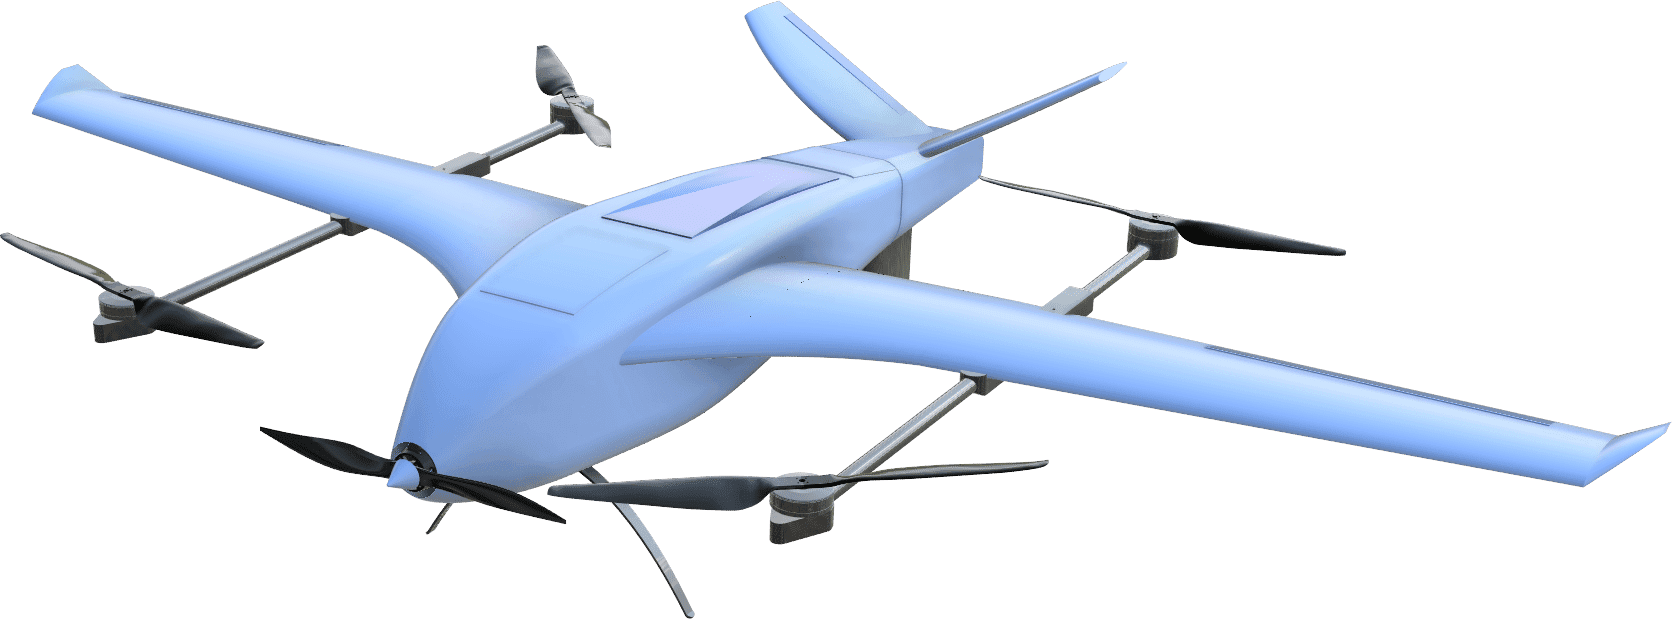 logistics drone having payload capacity of 8 kg and endurance of 90 minutes and range of 120 km and maximum height of 4000 metres